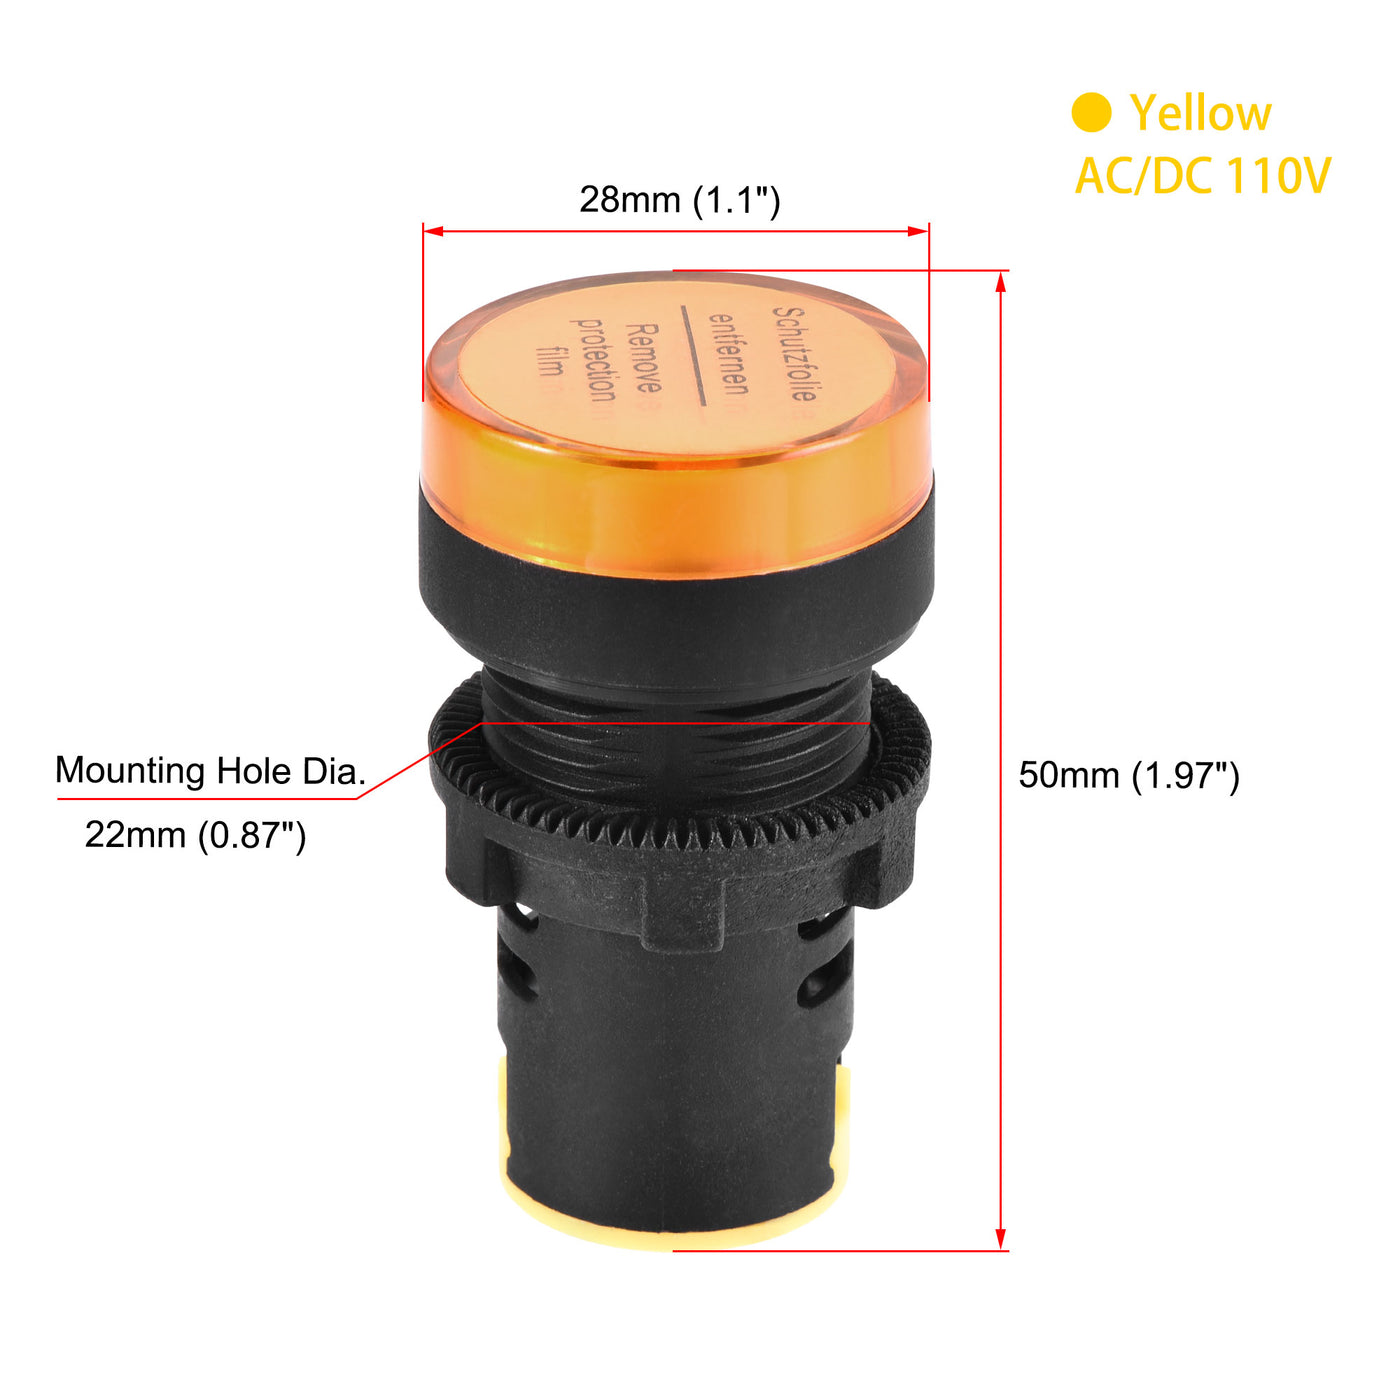 uxcell Uxcell Energy Saving LED Indicator Light AC/DC Dustproof Waterproof IP54 Pilot Lamp for Electrical Equipment Power Operating Status